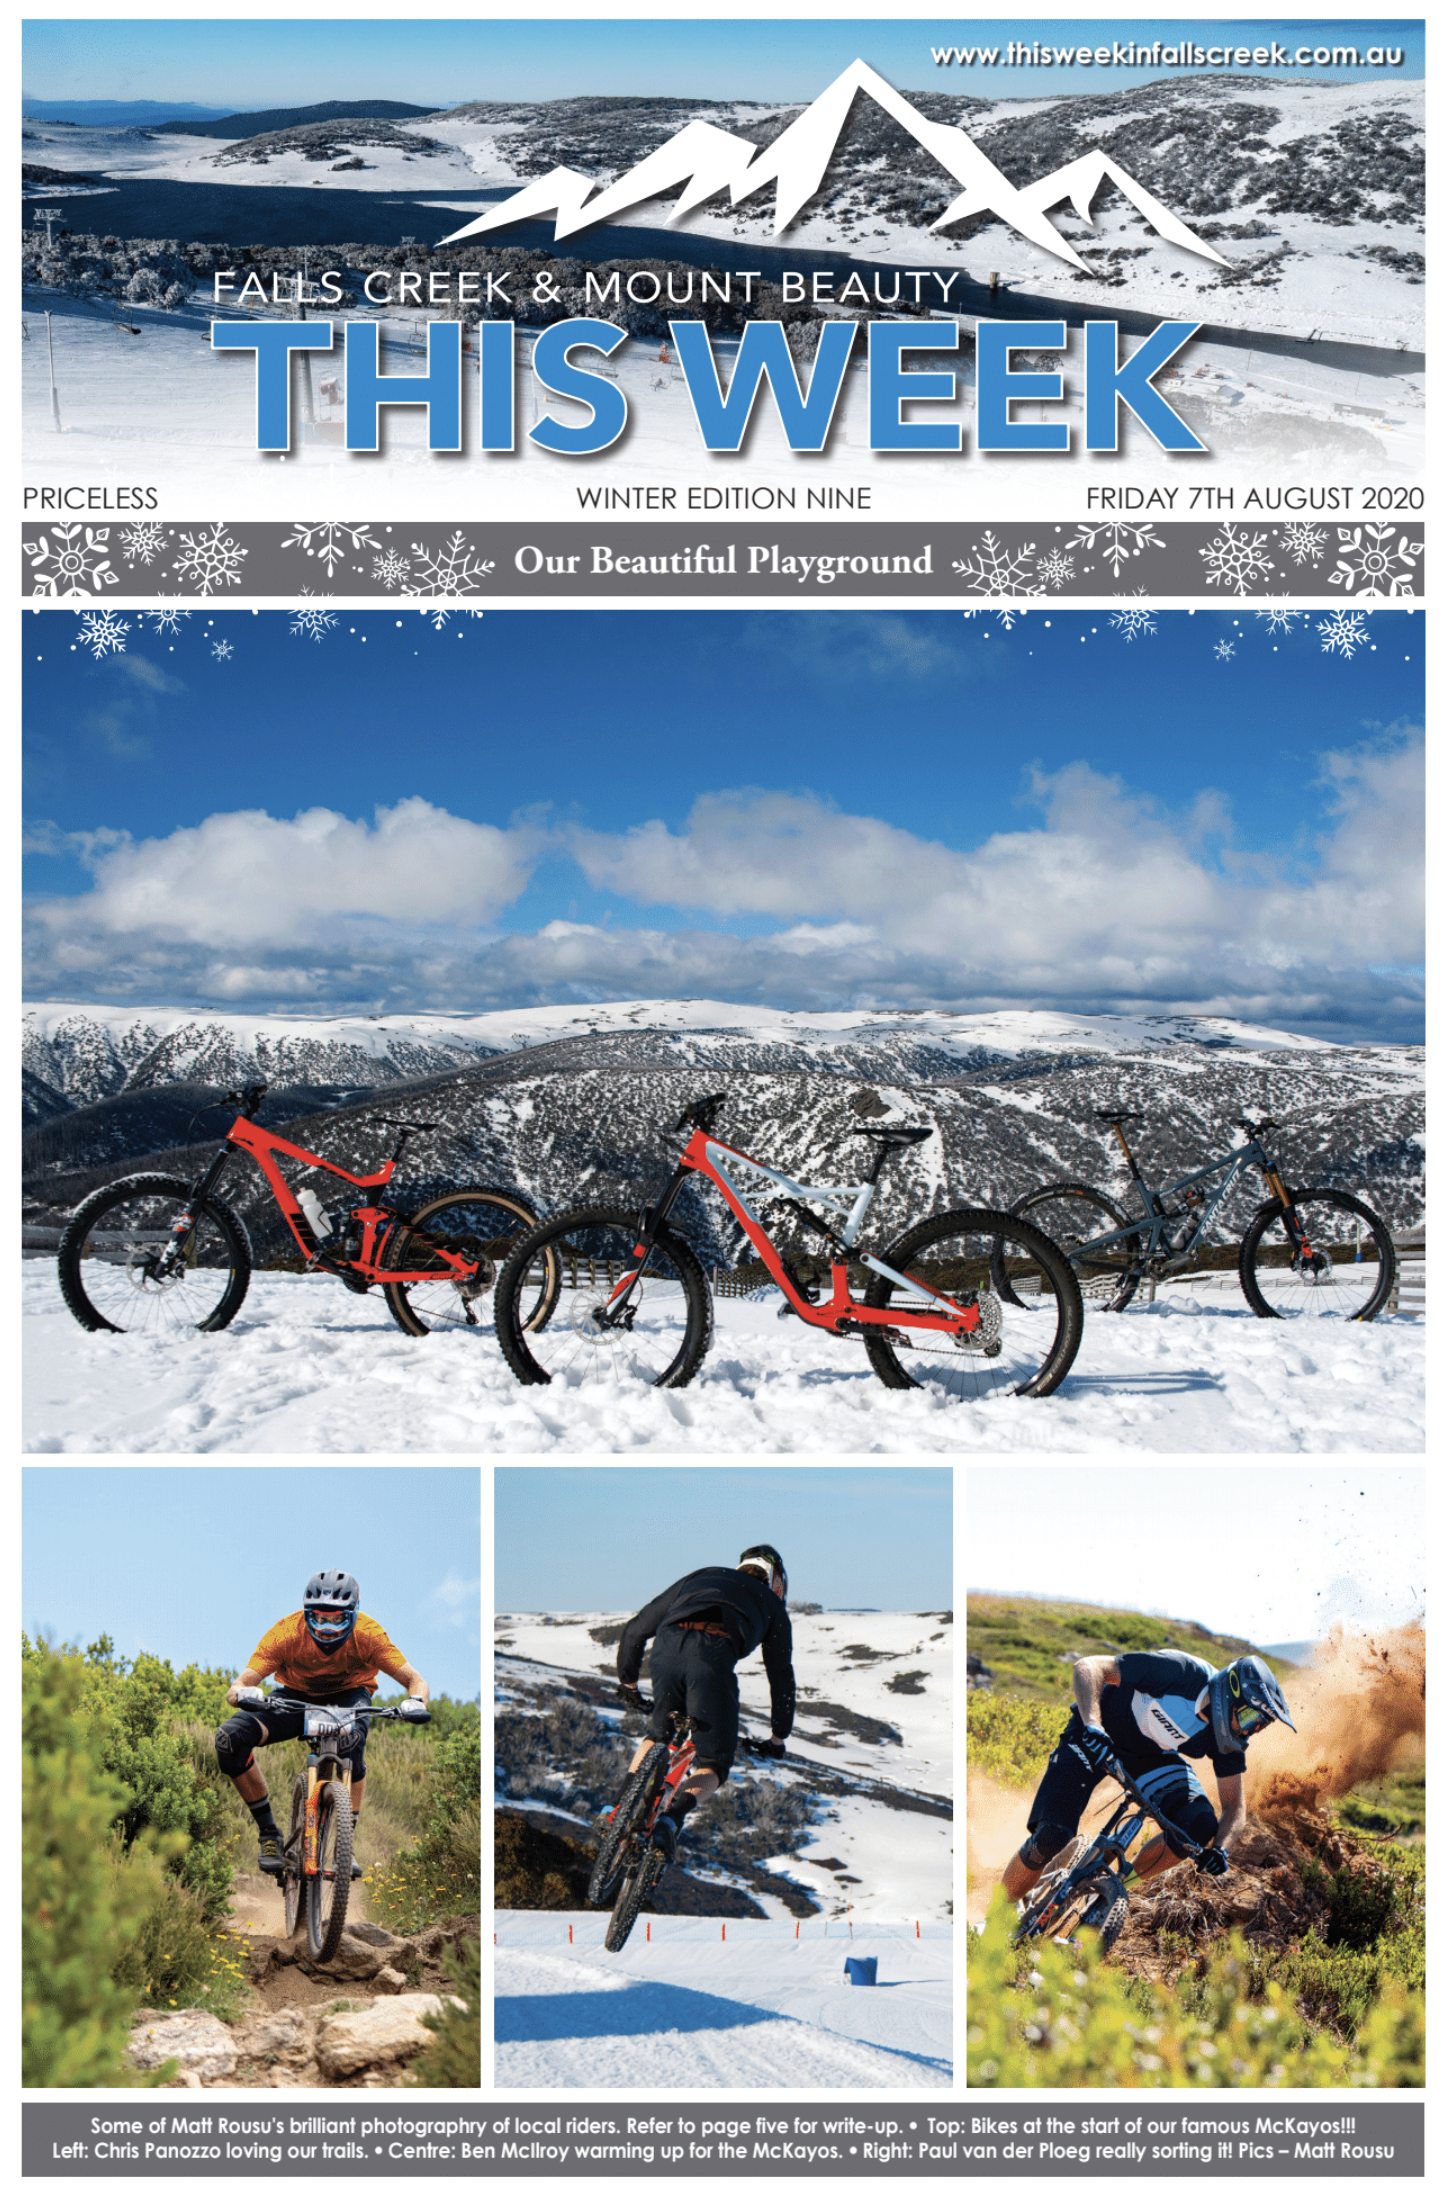 Winter Edition #9 - 7th August